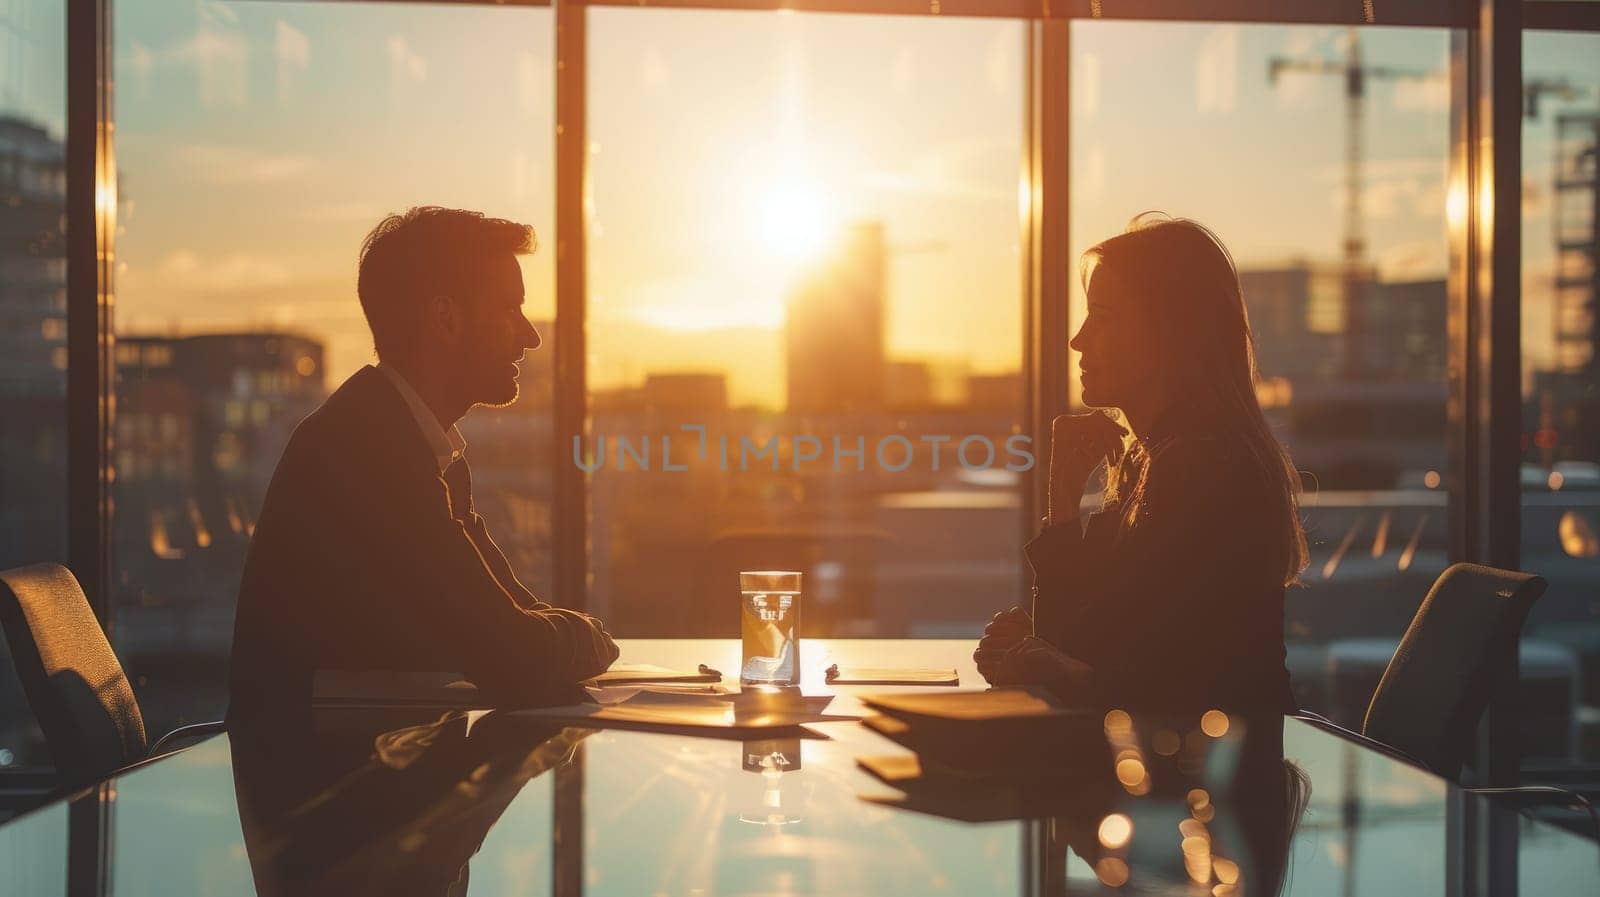 An interview scenario where a candidate and an interviewer engage in a conversation across a sleek office desk.